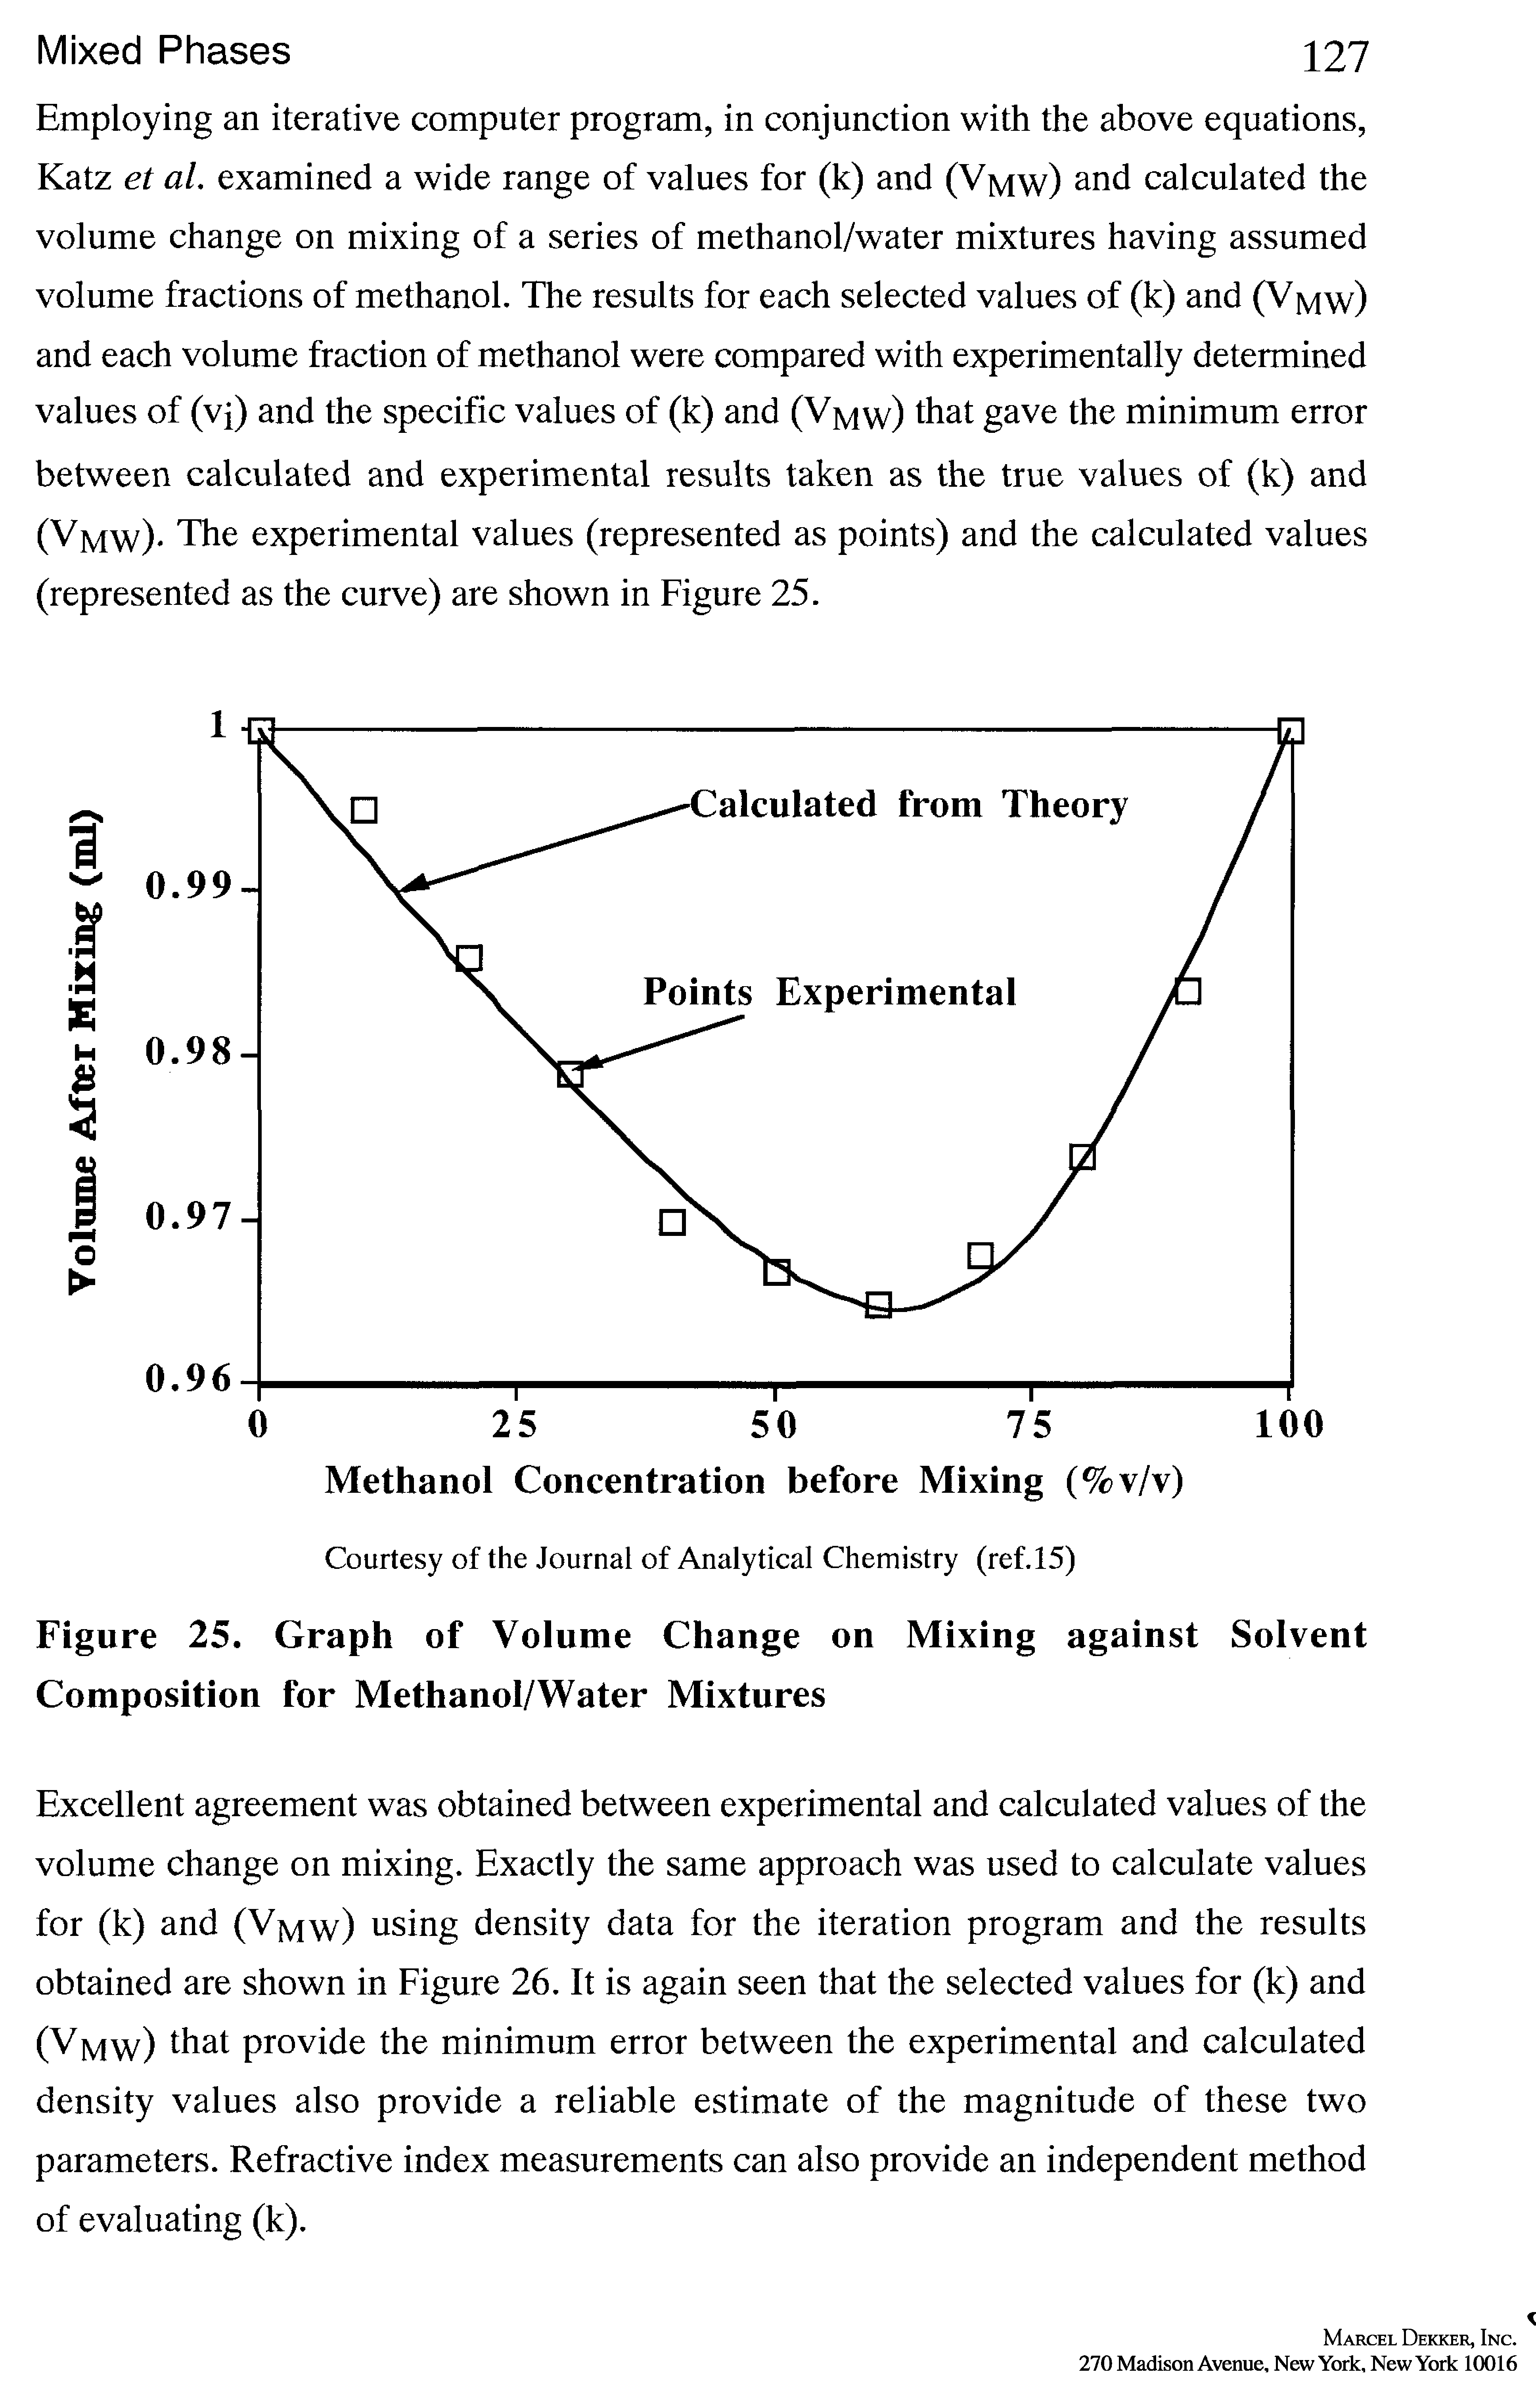 Figure 25. Graph of Volume Change on Mixing against Solvent Composition for Methanol/Water Mixtures...